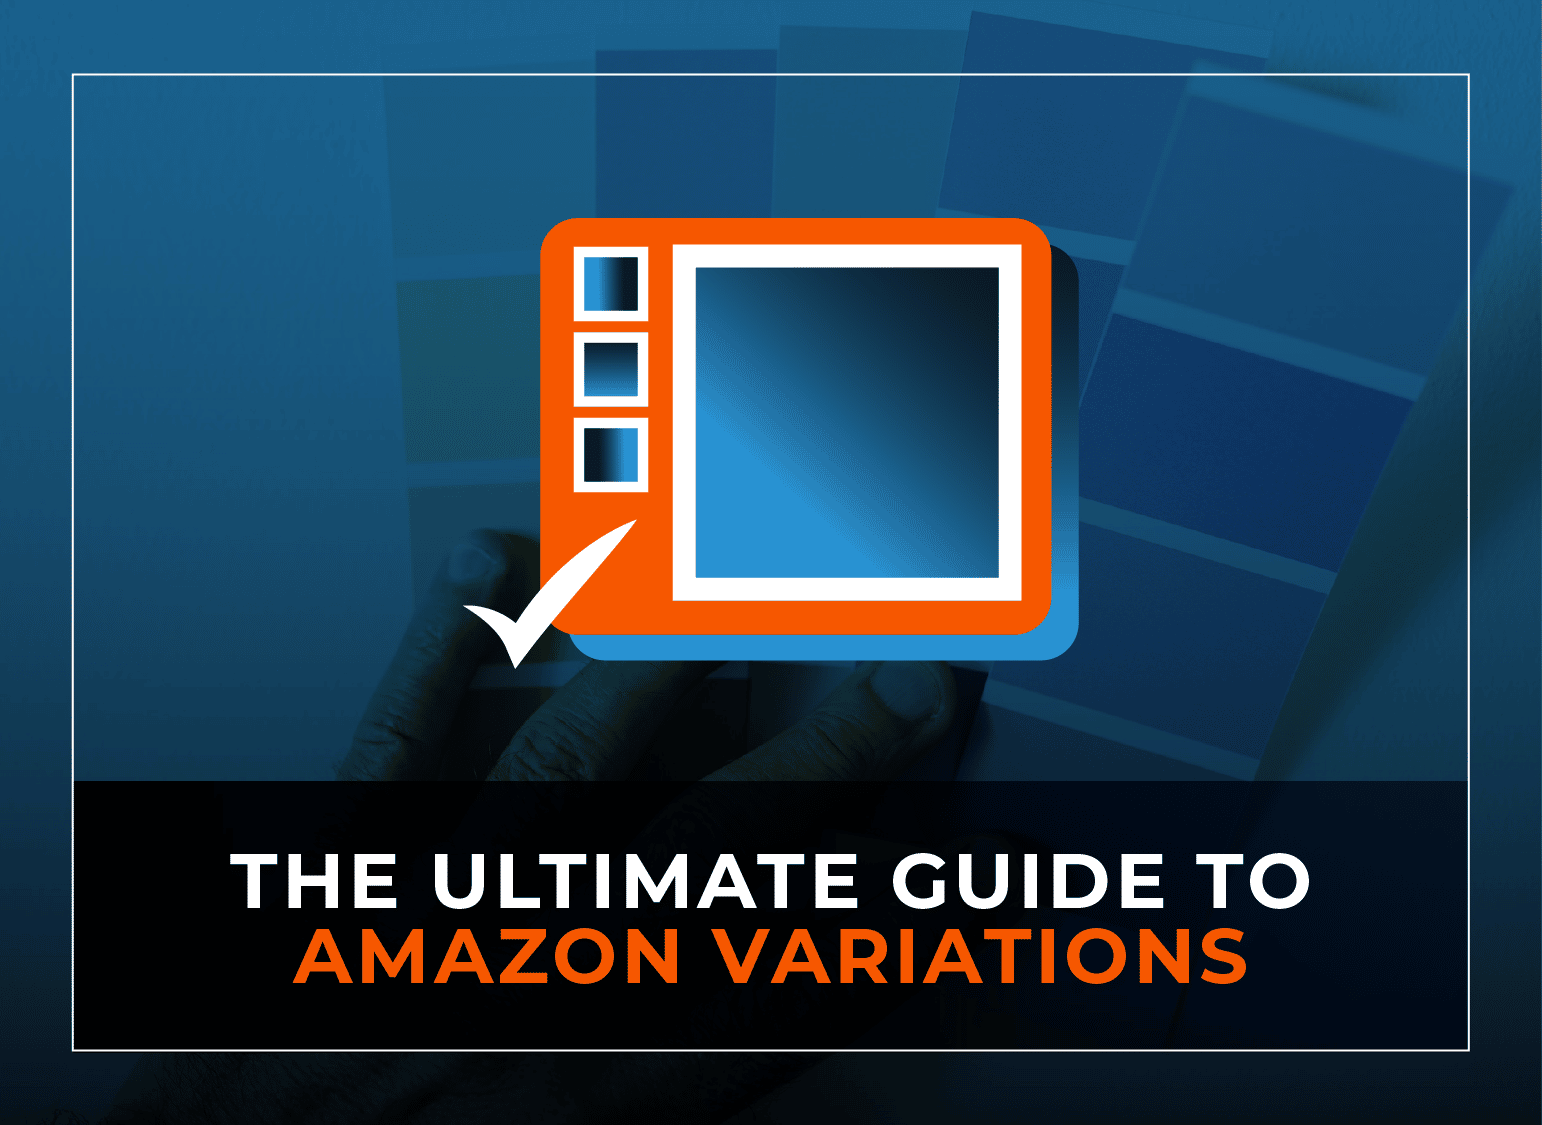 The Ultimate Guide to Amazon Variations